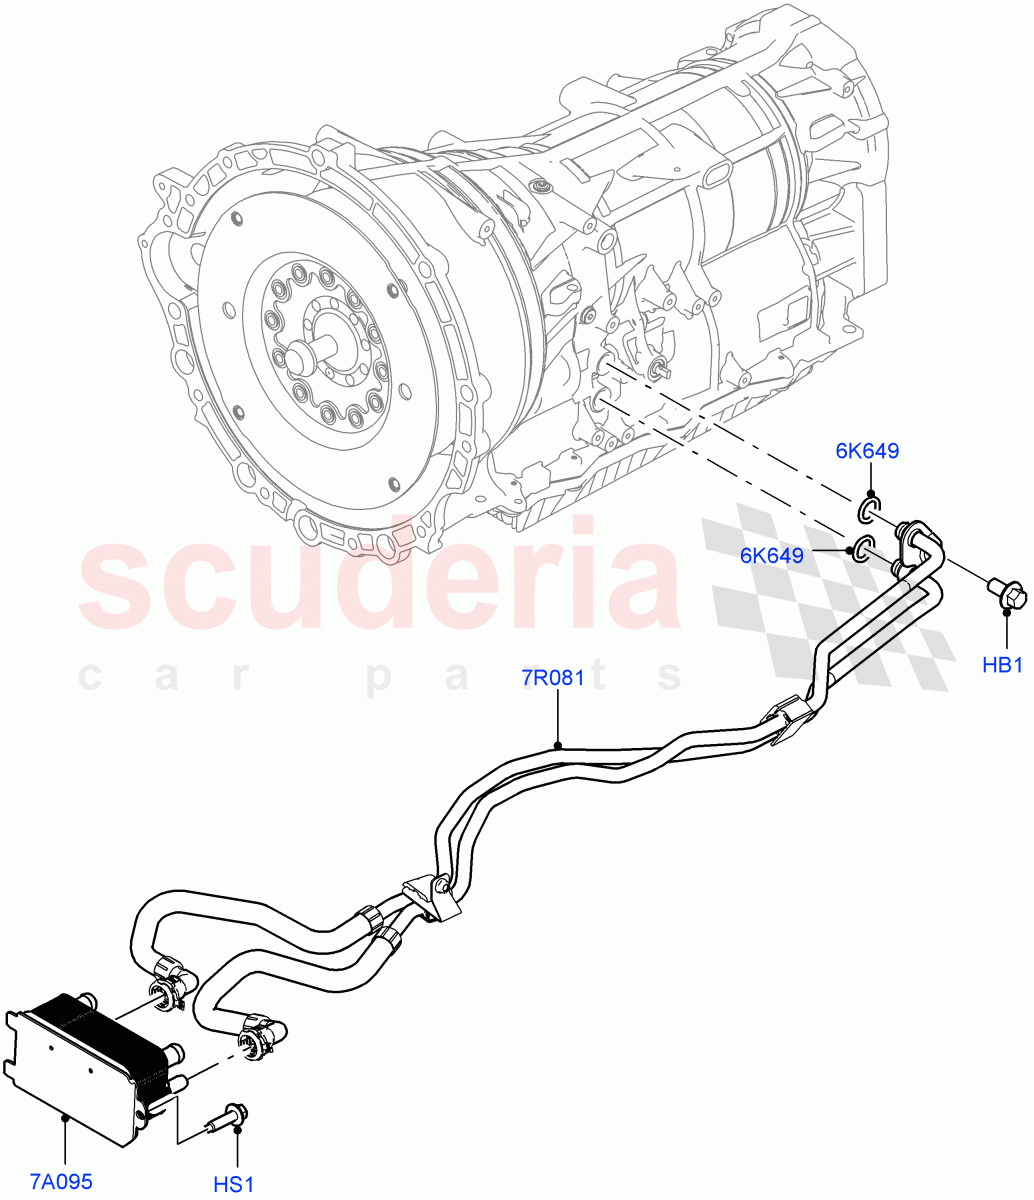 Transmission Cooling Systems(Solihull Plant Build)(2.0L I4 High DOHC AJ200 Petrol,8 Speed Auto Trans ZF 8HP45)((V)FROMJA000001) of Land Rover Land Rover Discovery 5 (2017+) [2.0 Turbo Petrol AJ200P]